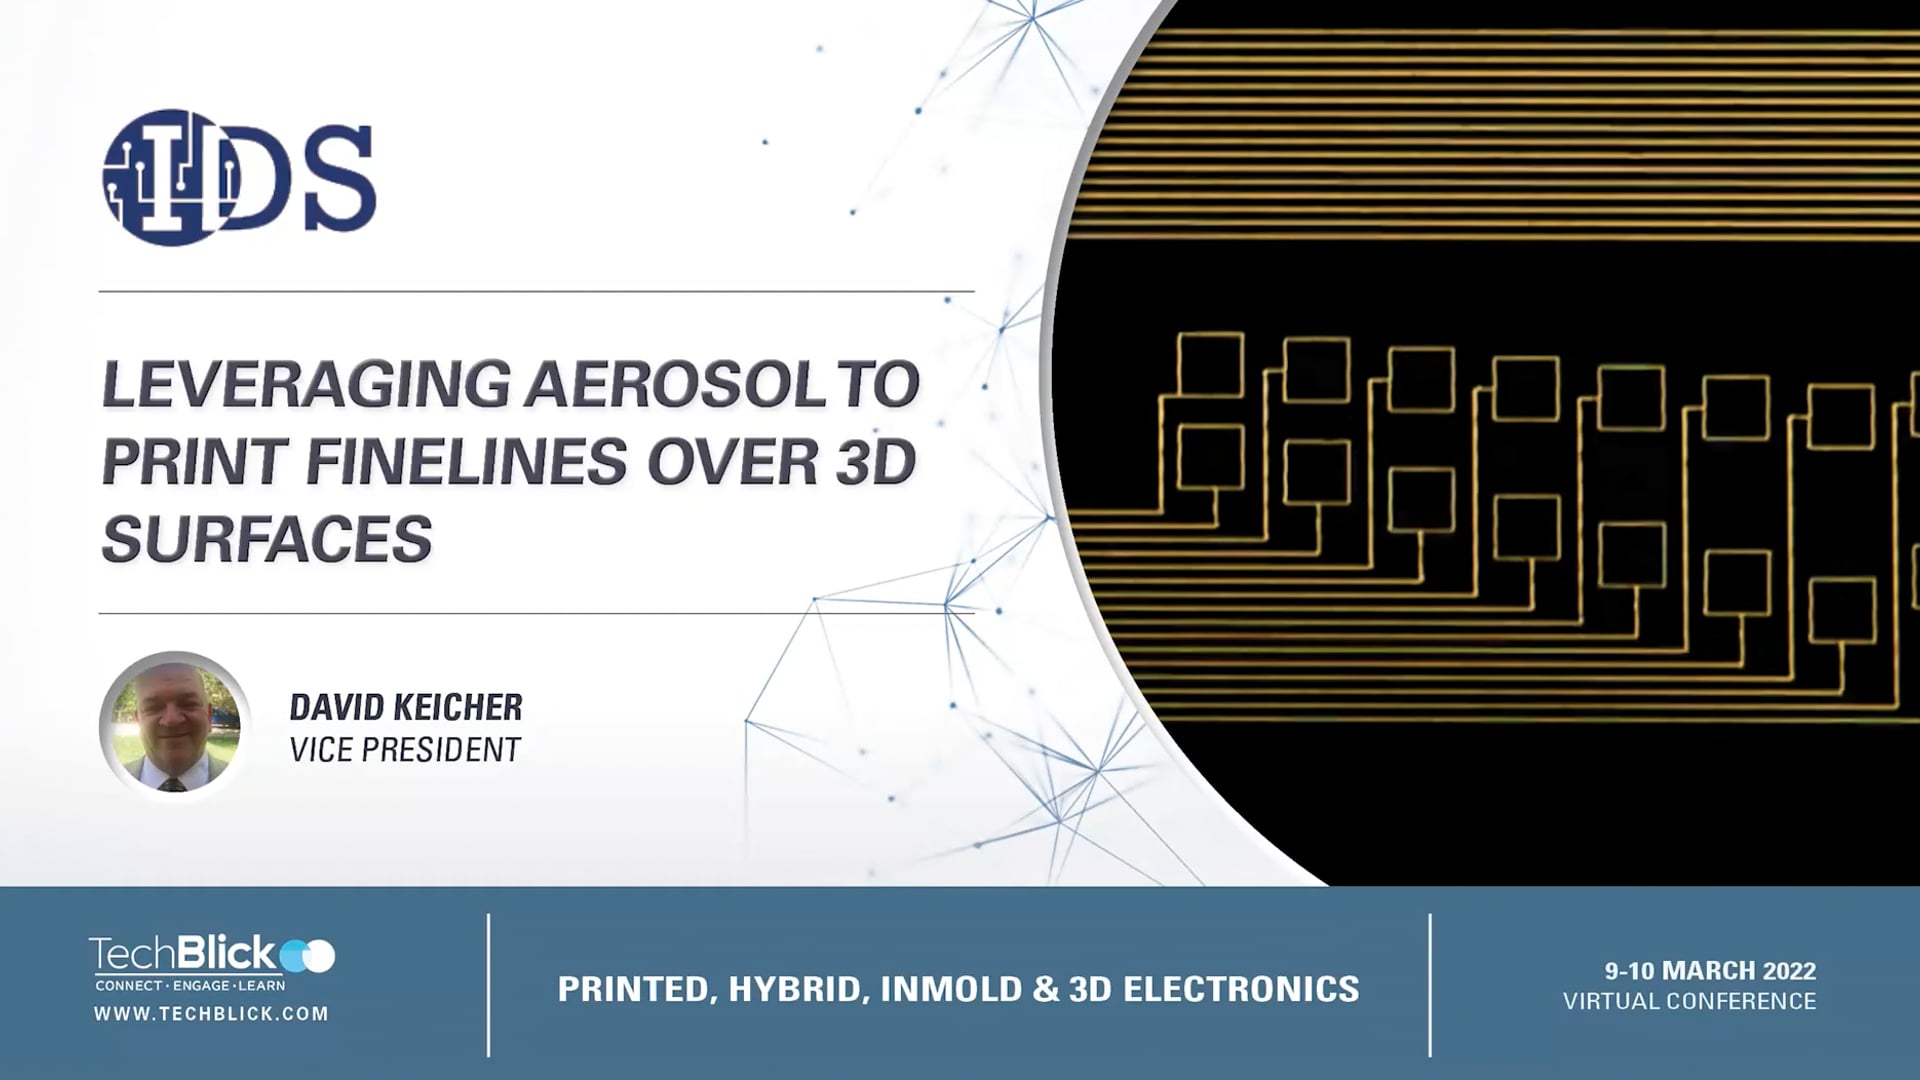 9 March 2022 | IDS | Leveraging Aerosol To Print Finelines Over 3D Surfaces | 5 min